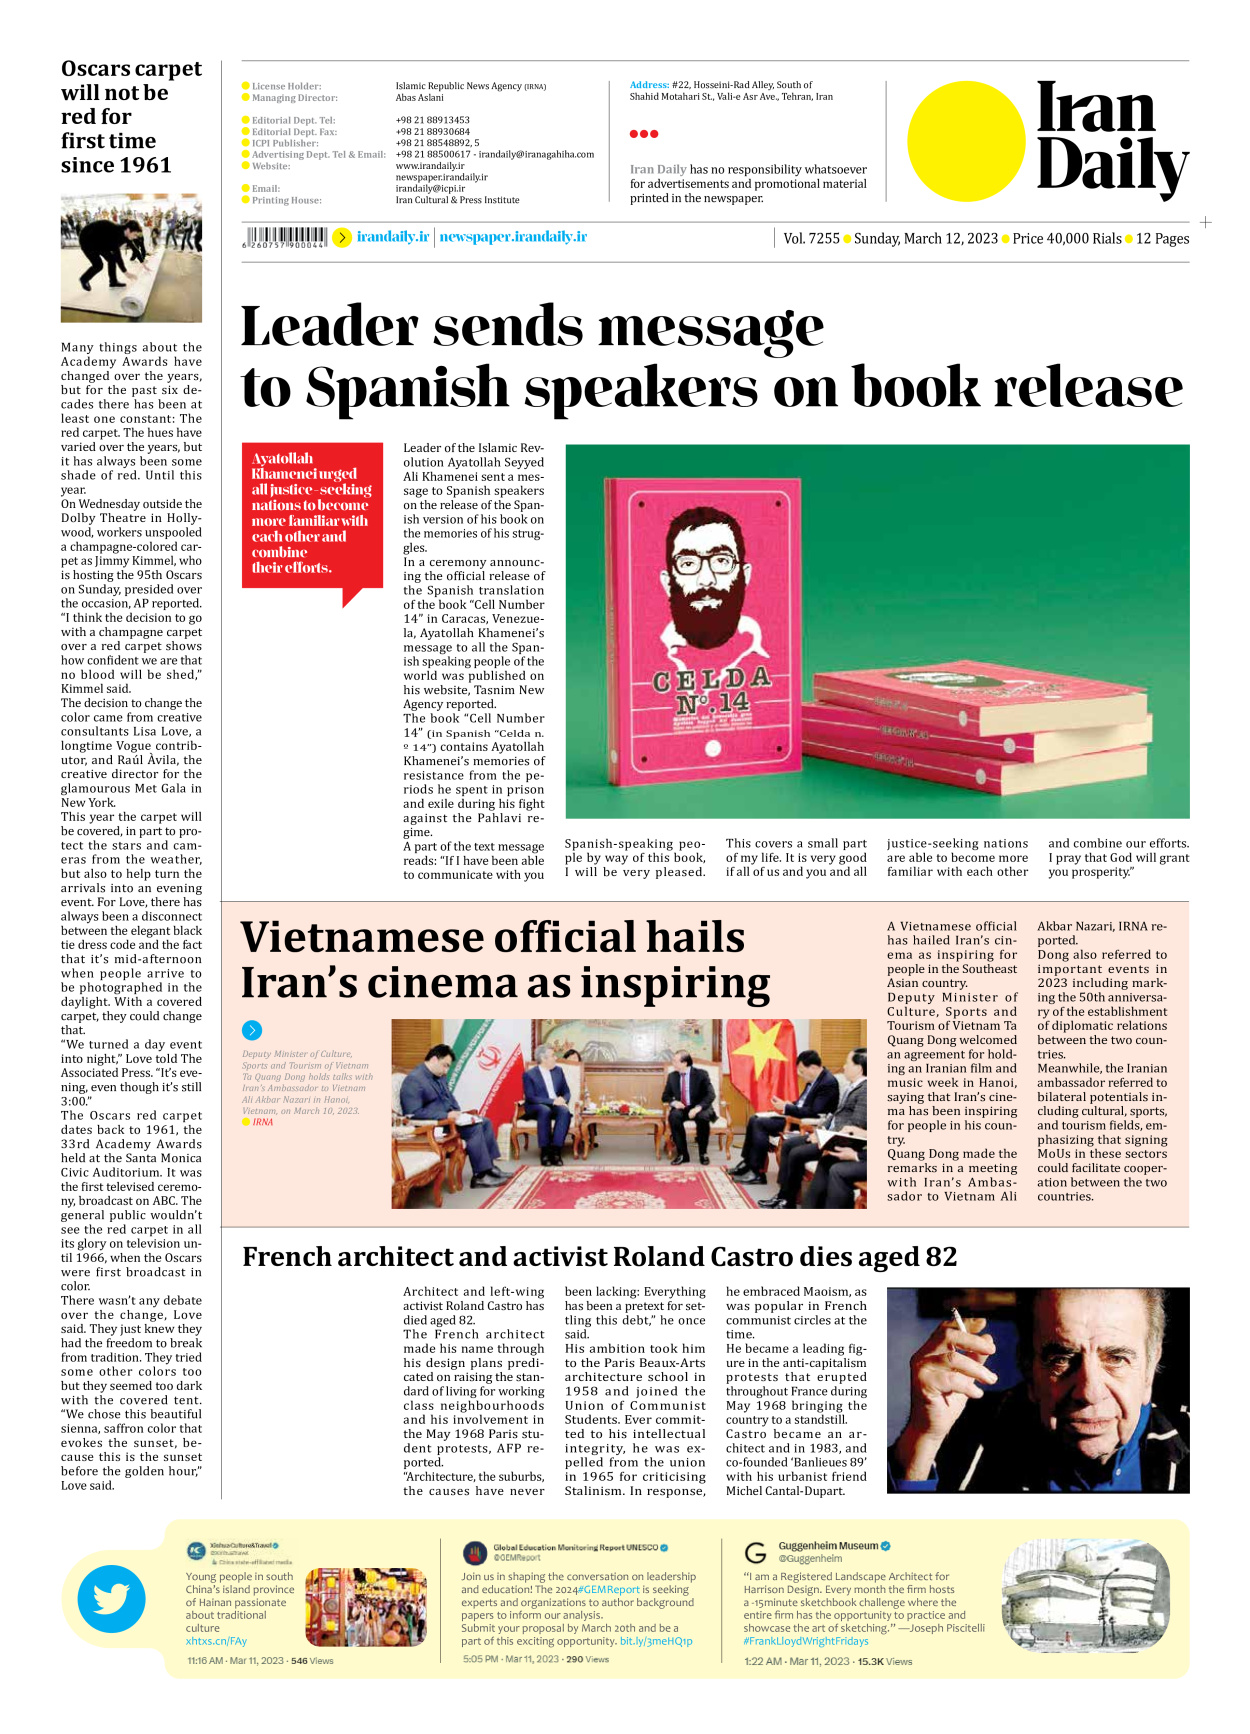 Iran Daily - Number Seven Thousand Two Hundred and Fifty Five - 12 March 2023 - Page 12